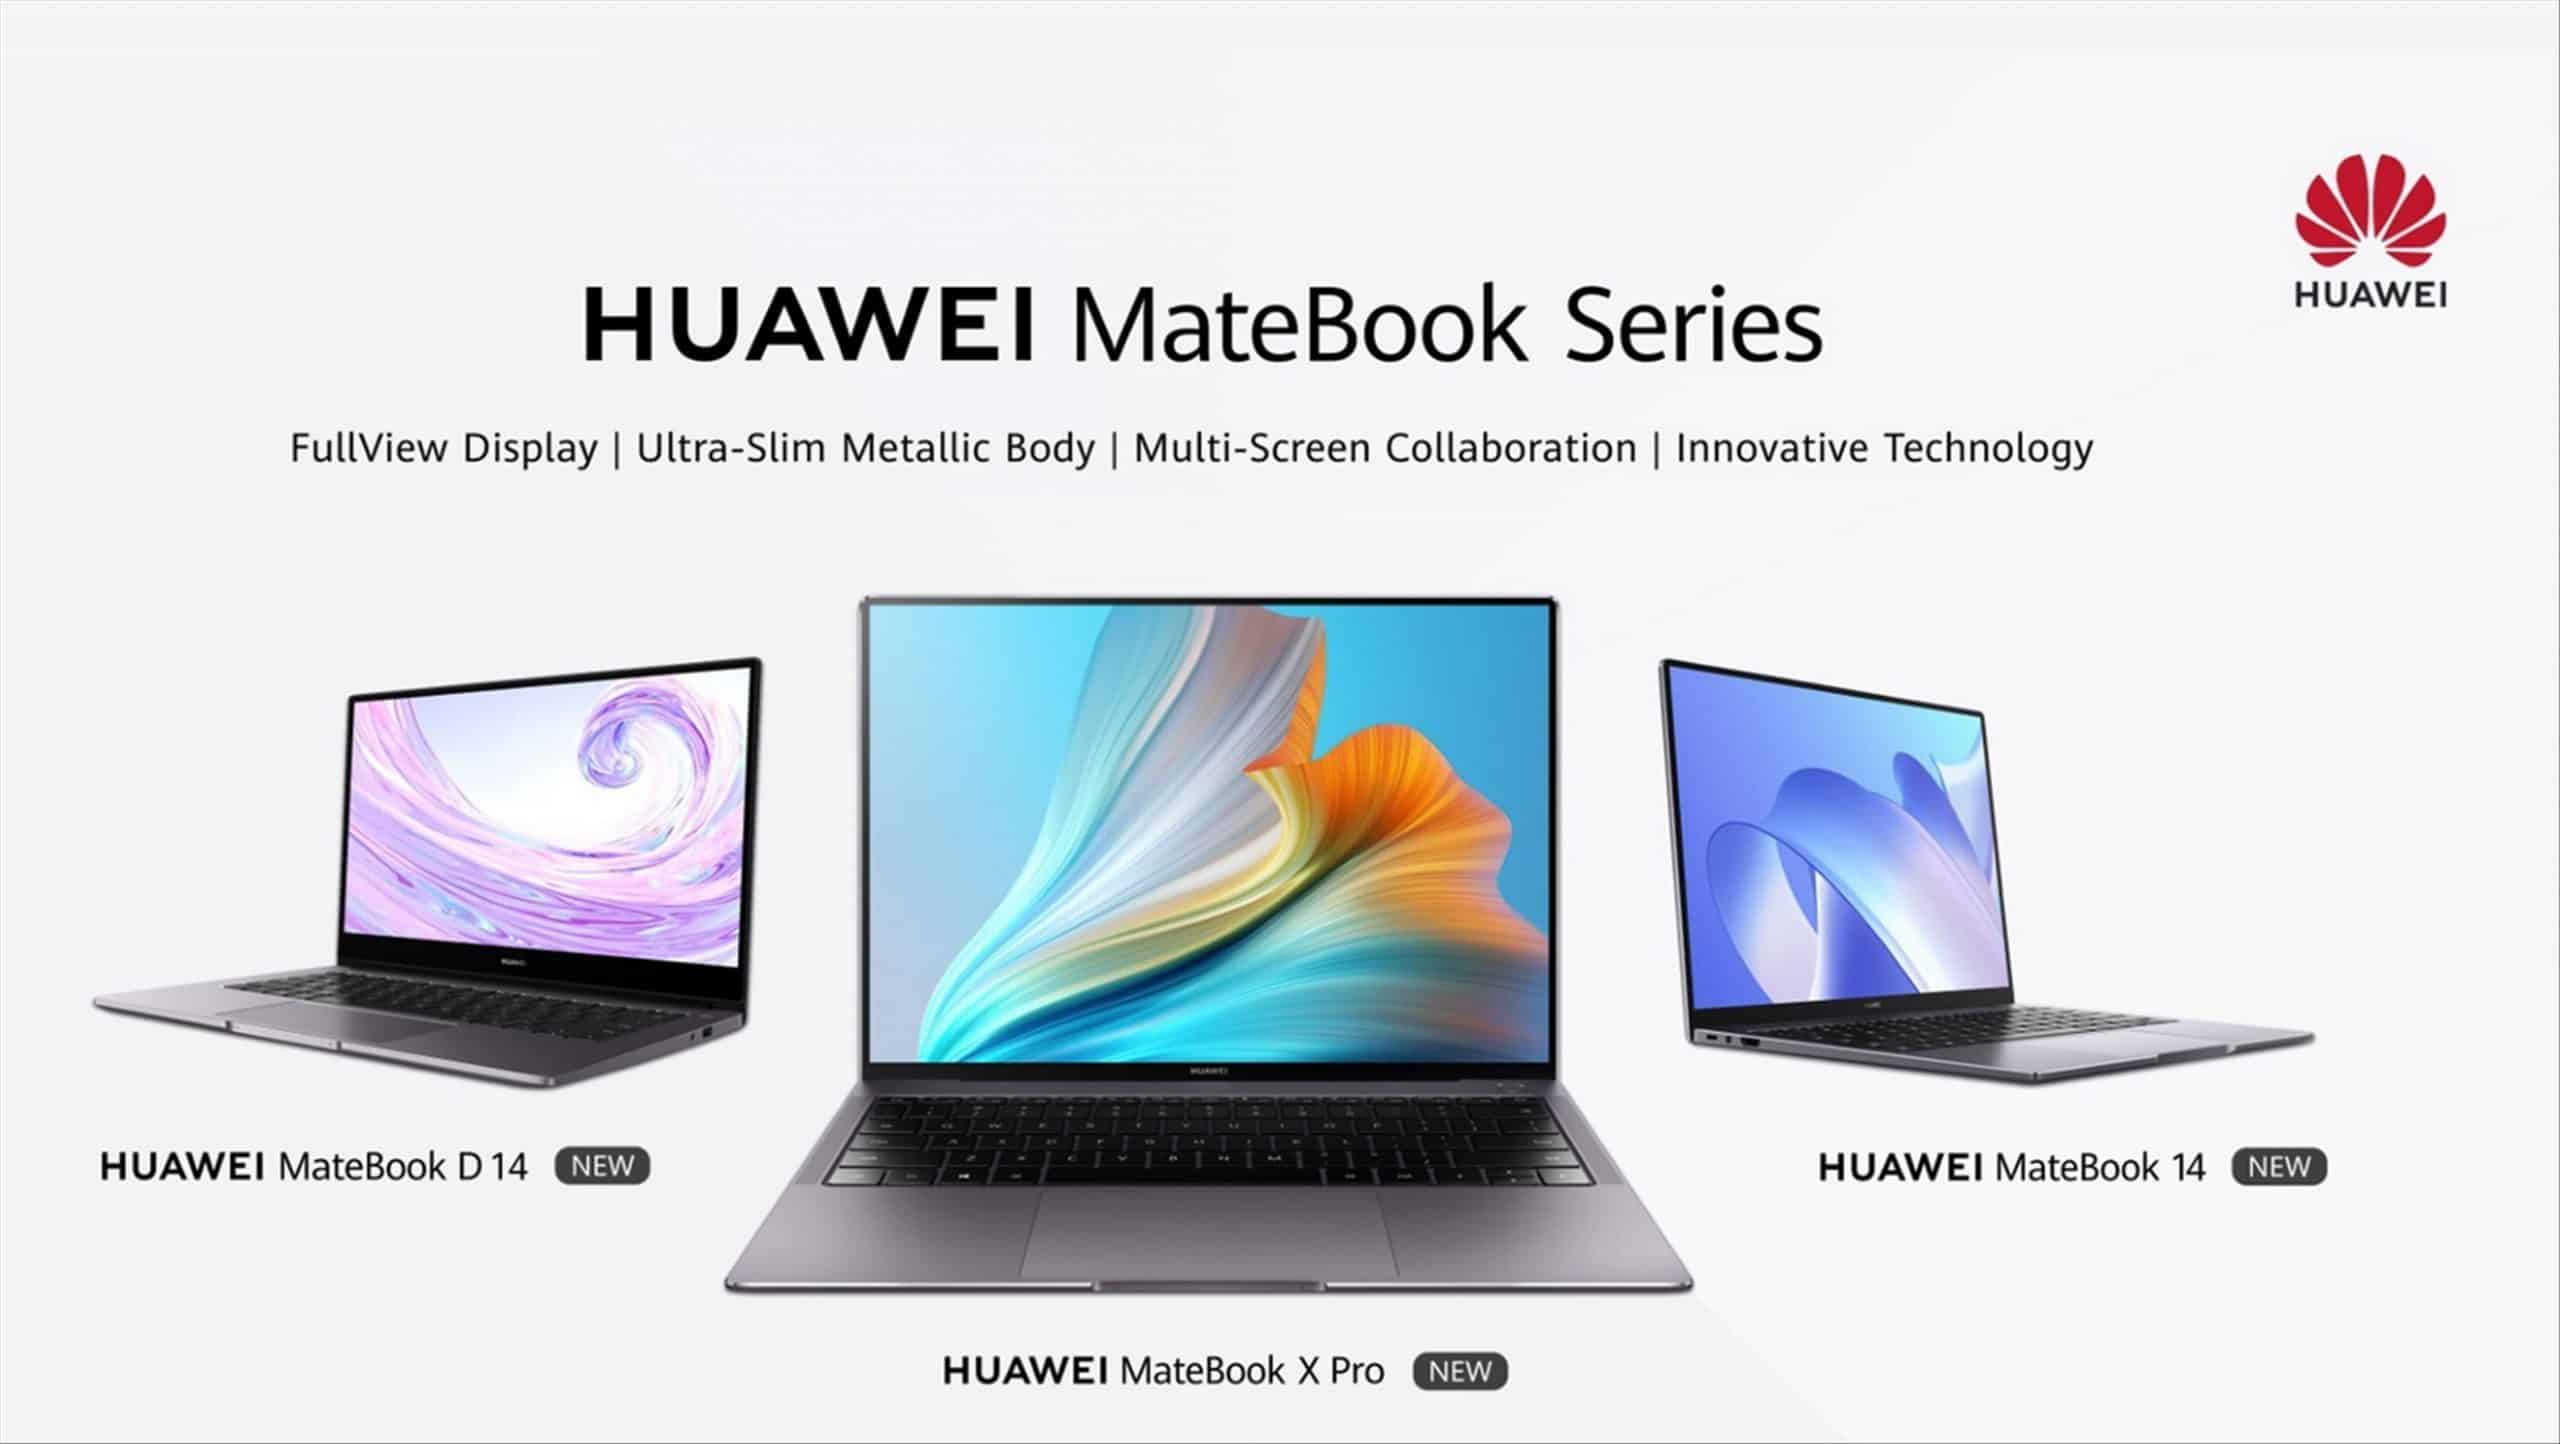 Huawei refreshes their MateBook Series laptops for the 2021